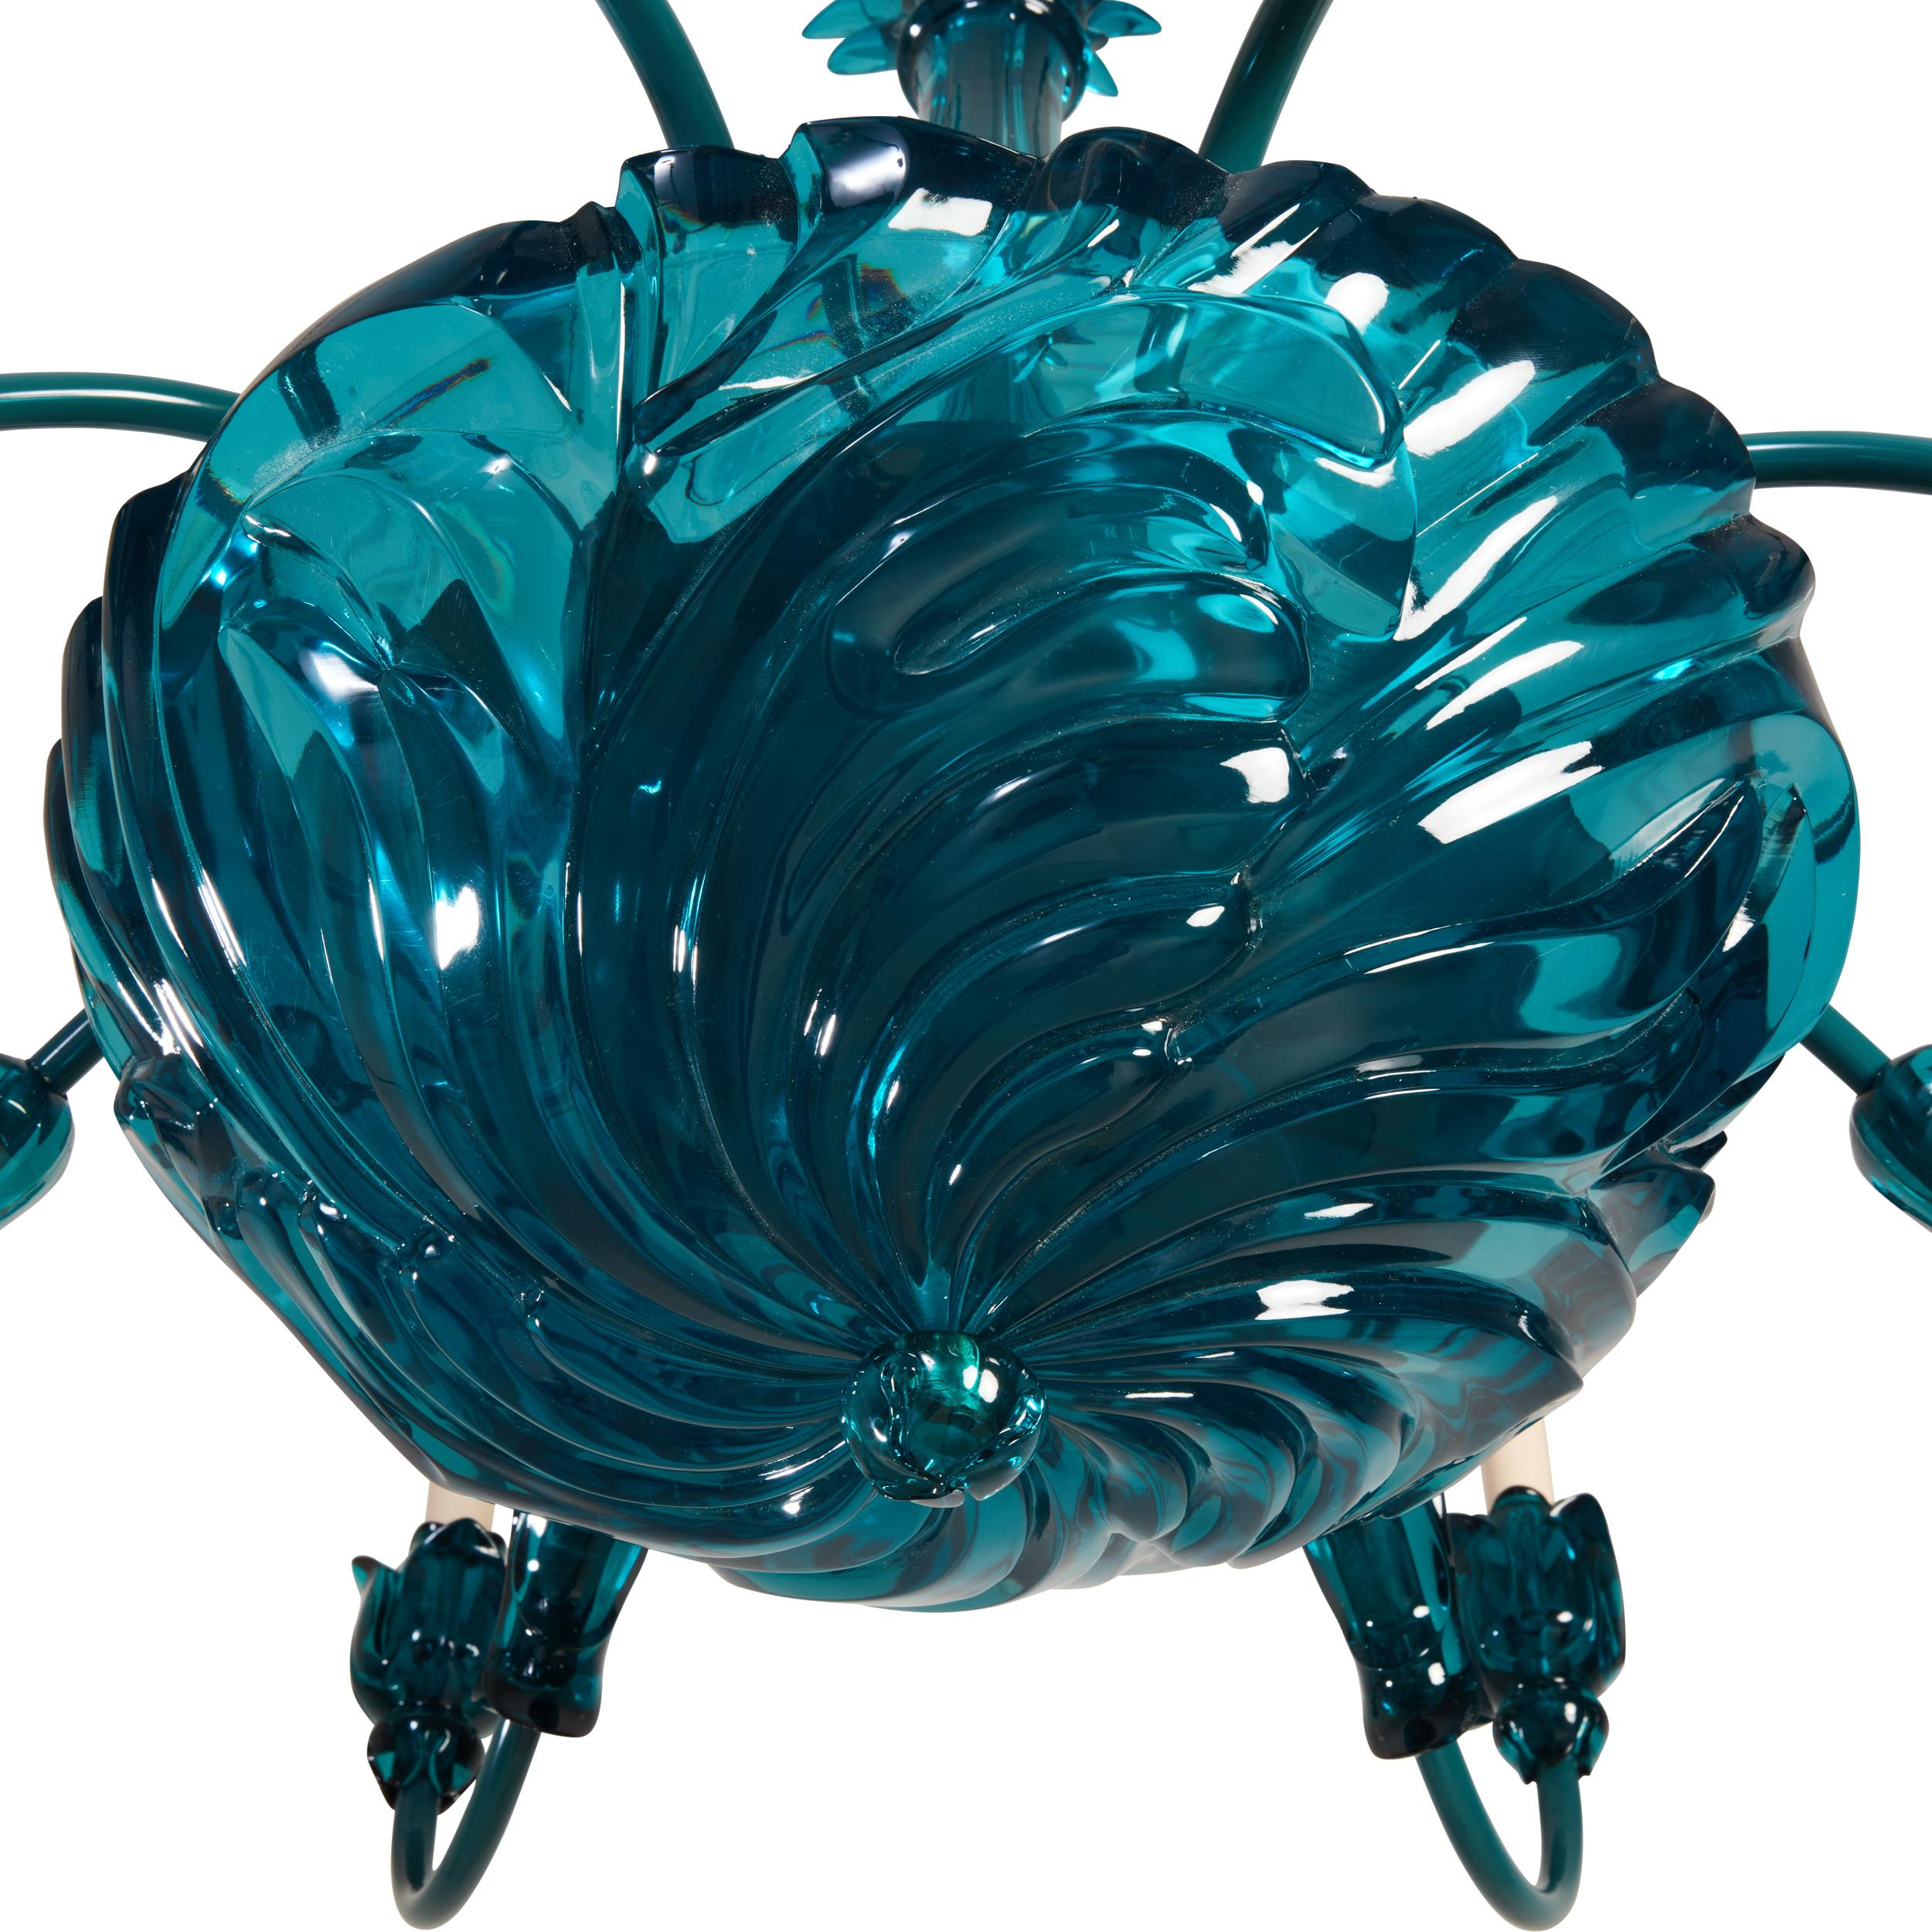 A single-tiered 8-light chandelier with shell formed dish, secured on underside by over-sized finial, the dish issuing candle-arms with applied leaf-shaped ornaments and lotus-form bobeches. The clear transparent teal resin and elements secured to